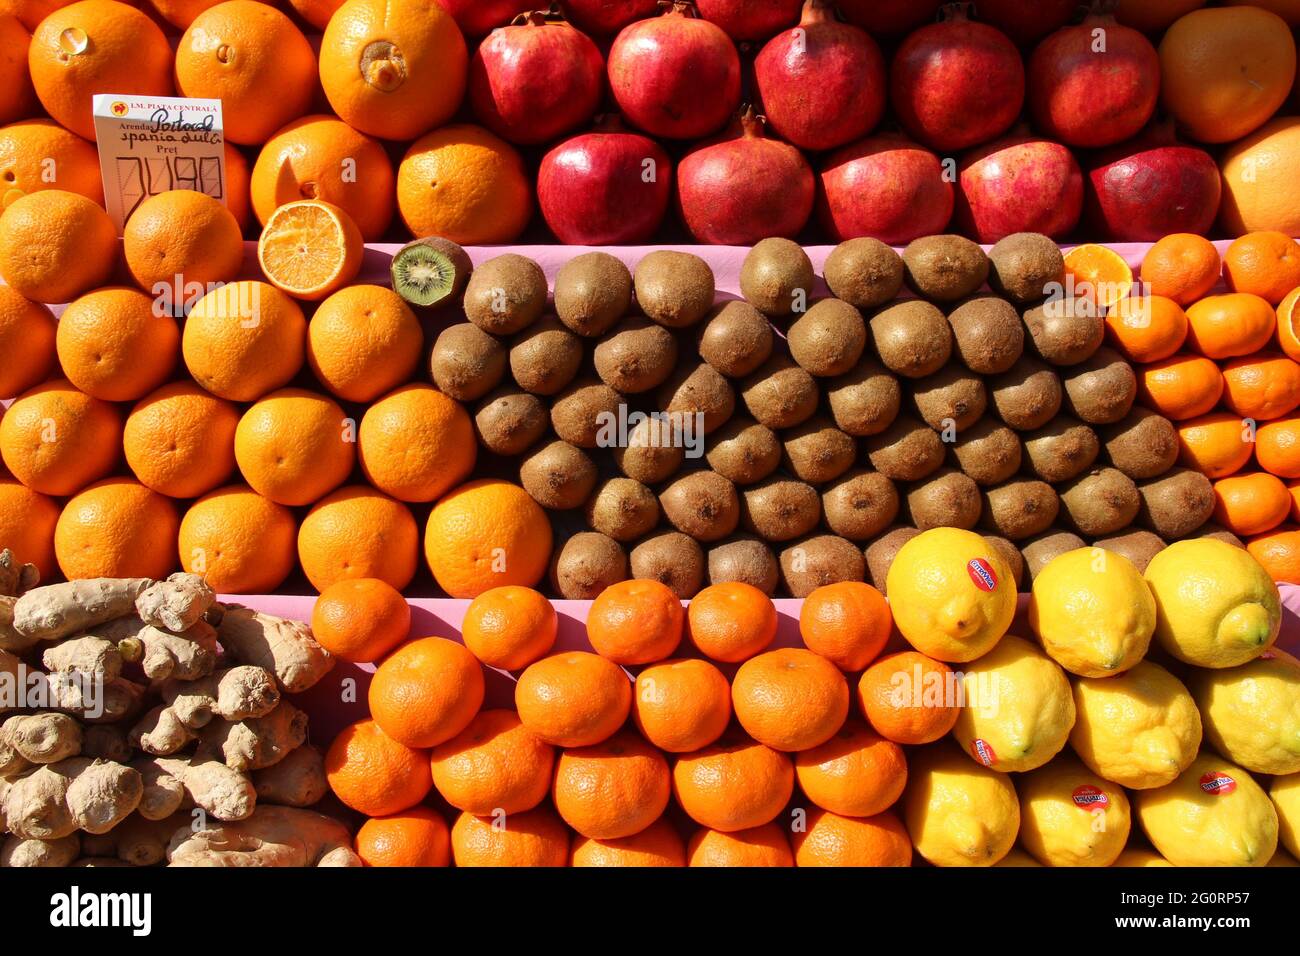 Colourful fruit and vegetables on sale at a market in Chisinau, Moldova Stock Photo